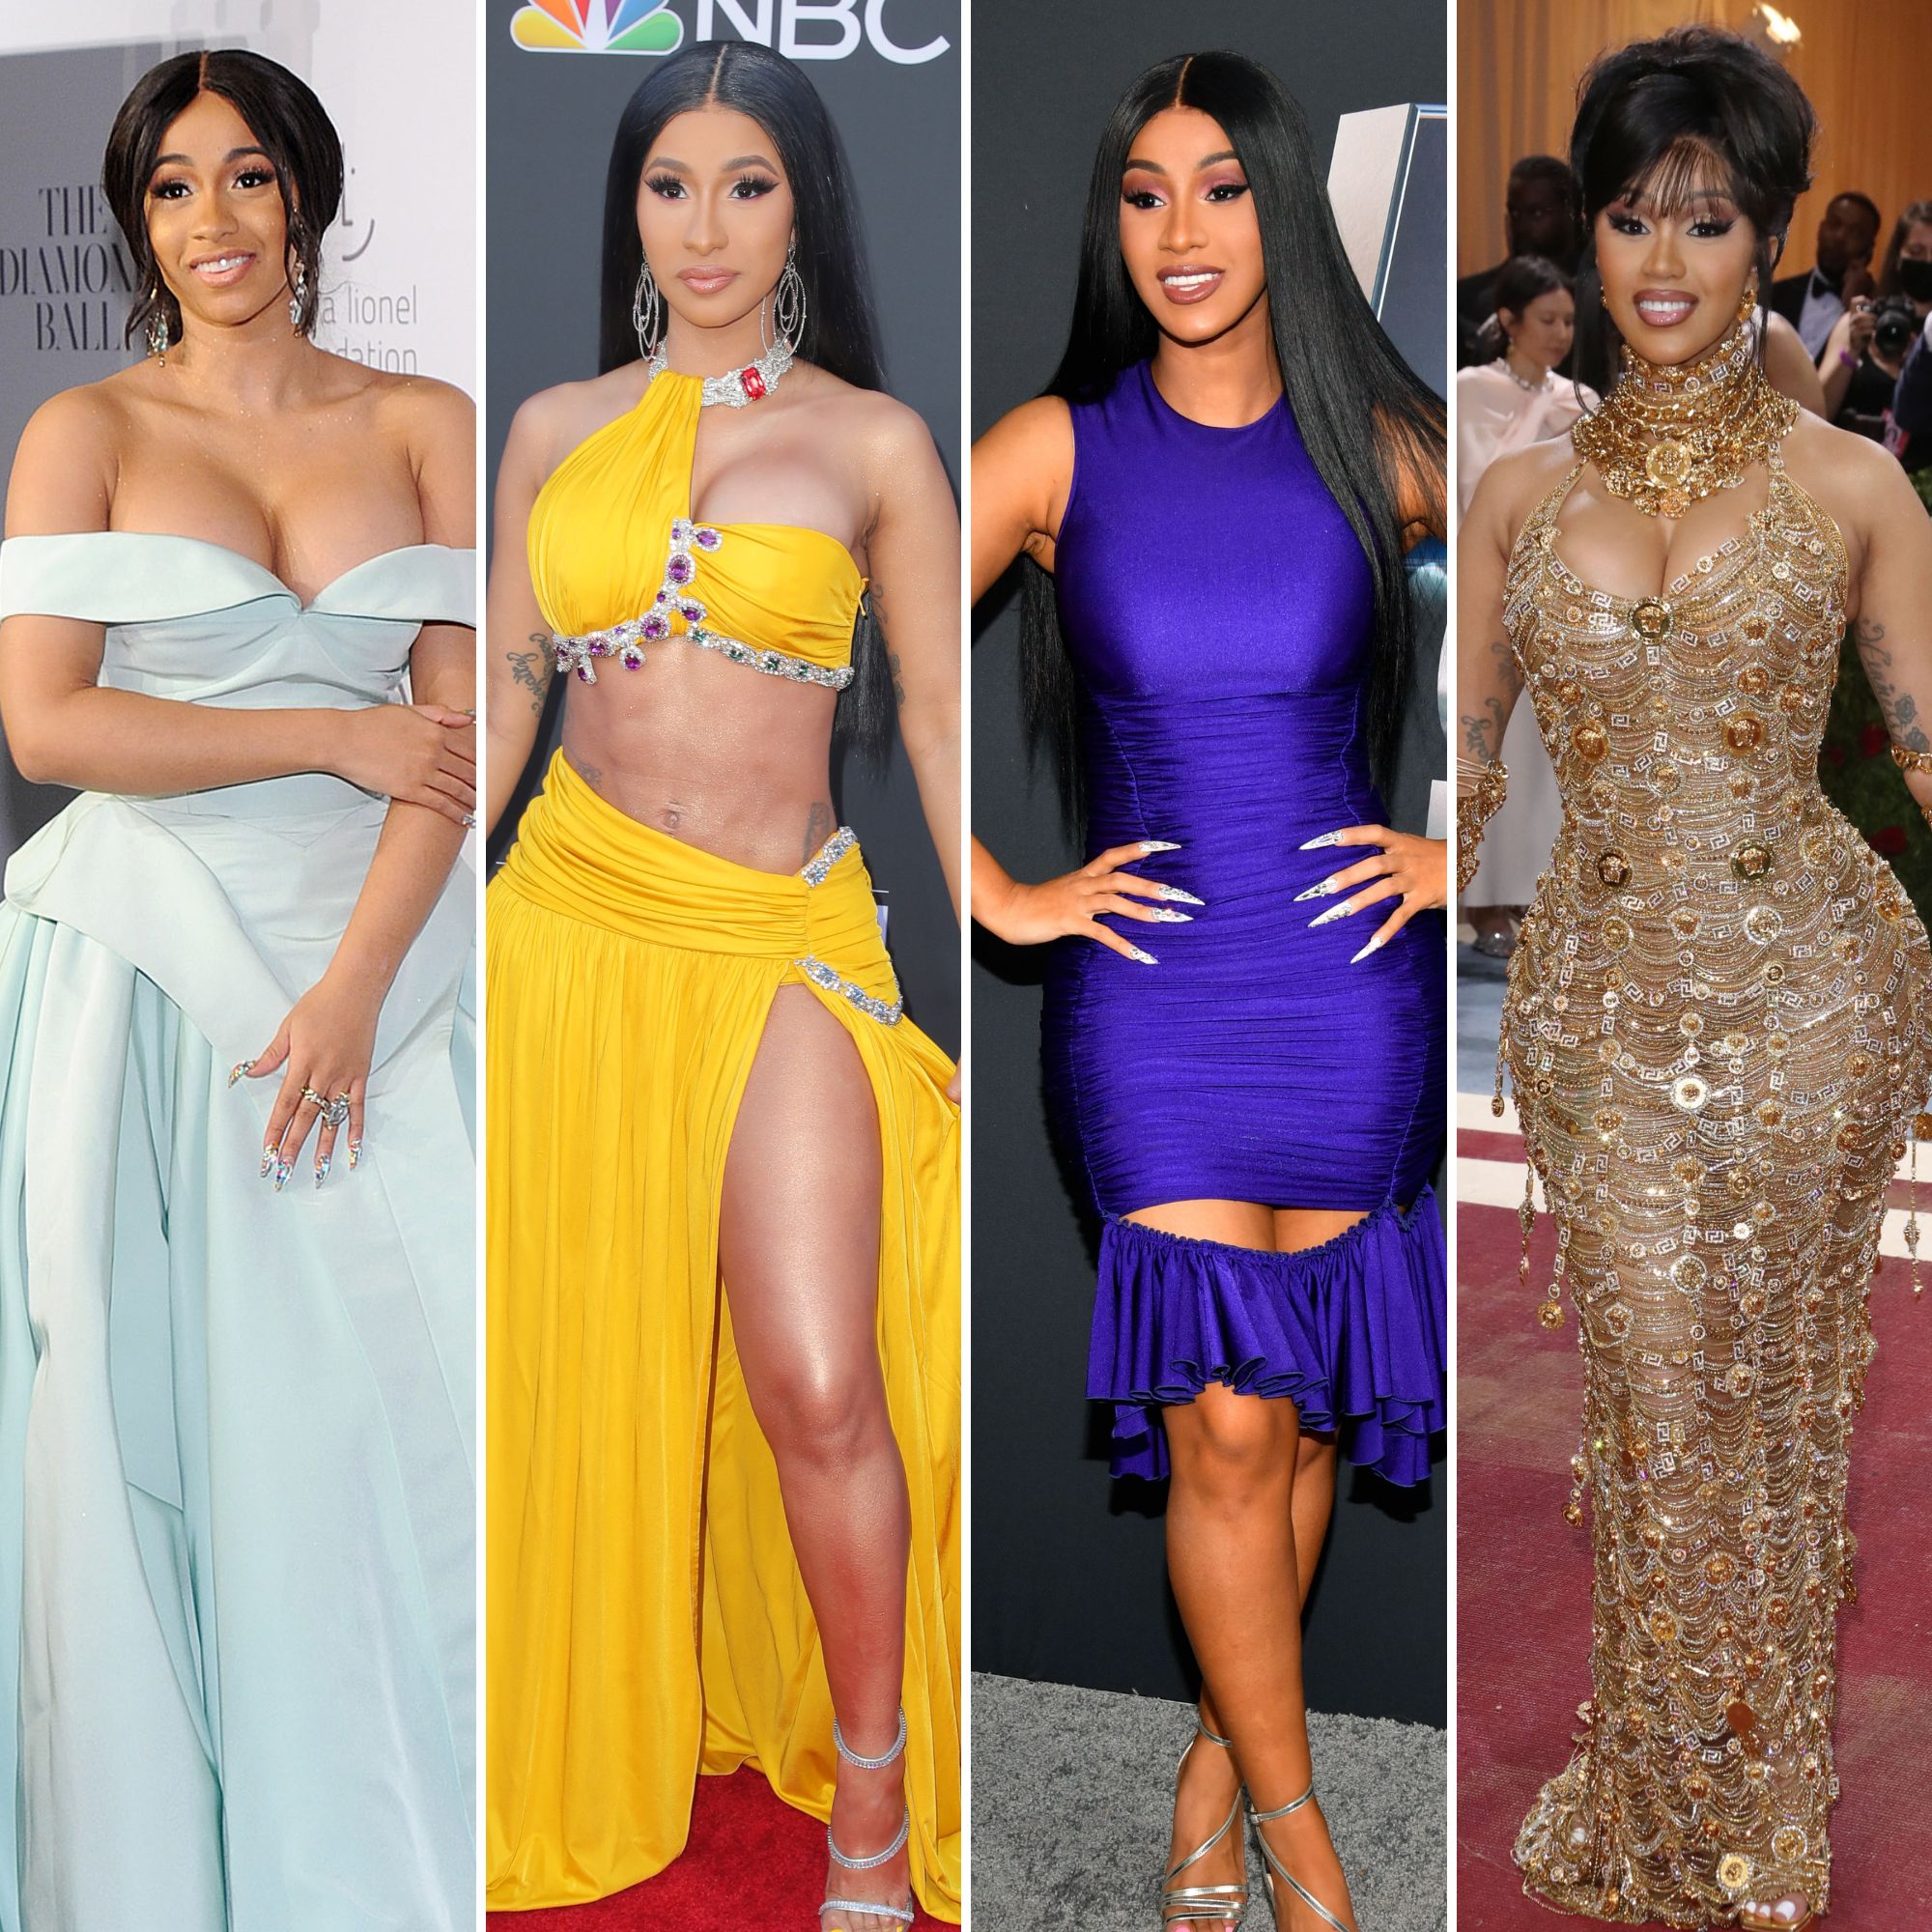 Cardi B's Best Red Carpet Moments and Style Evolution